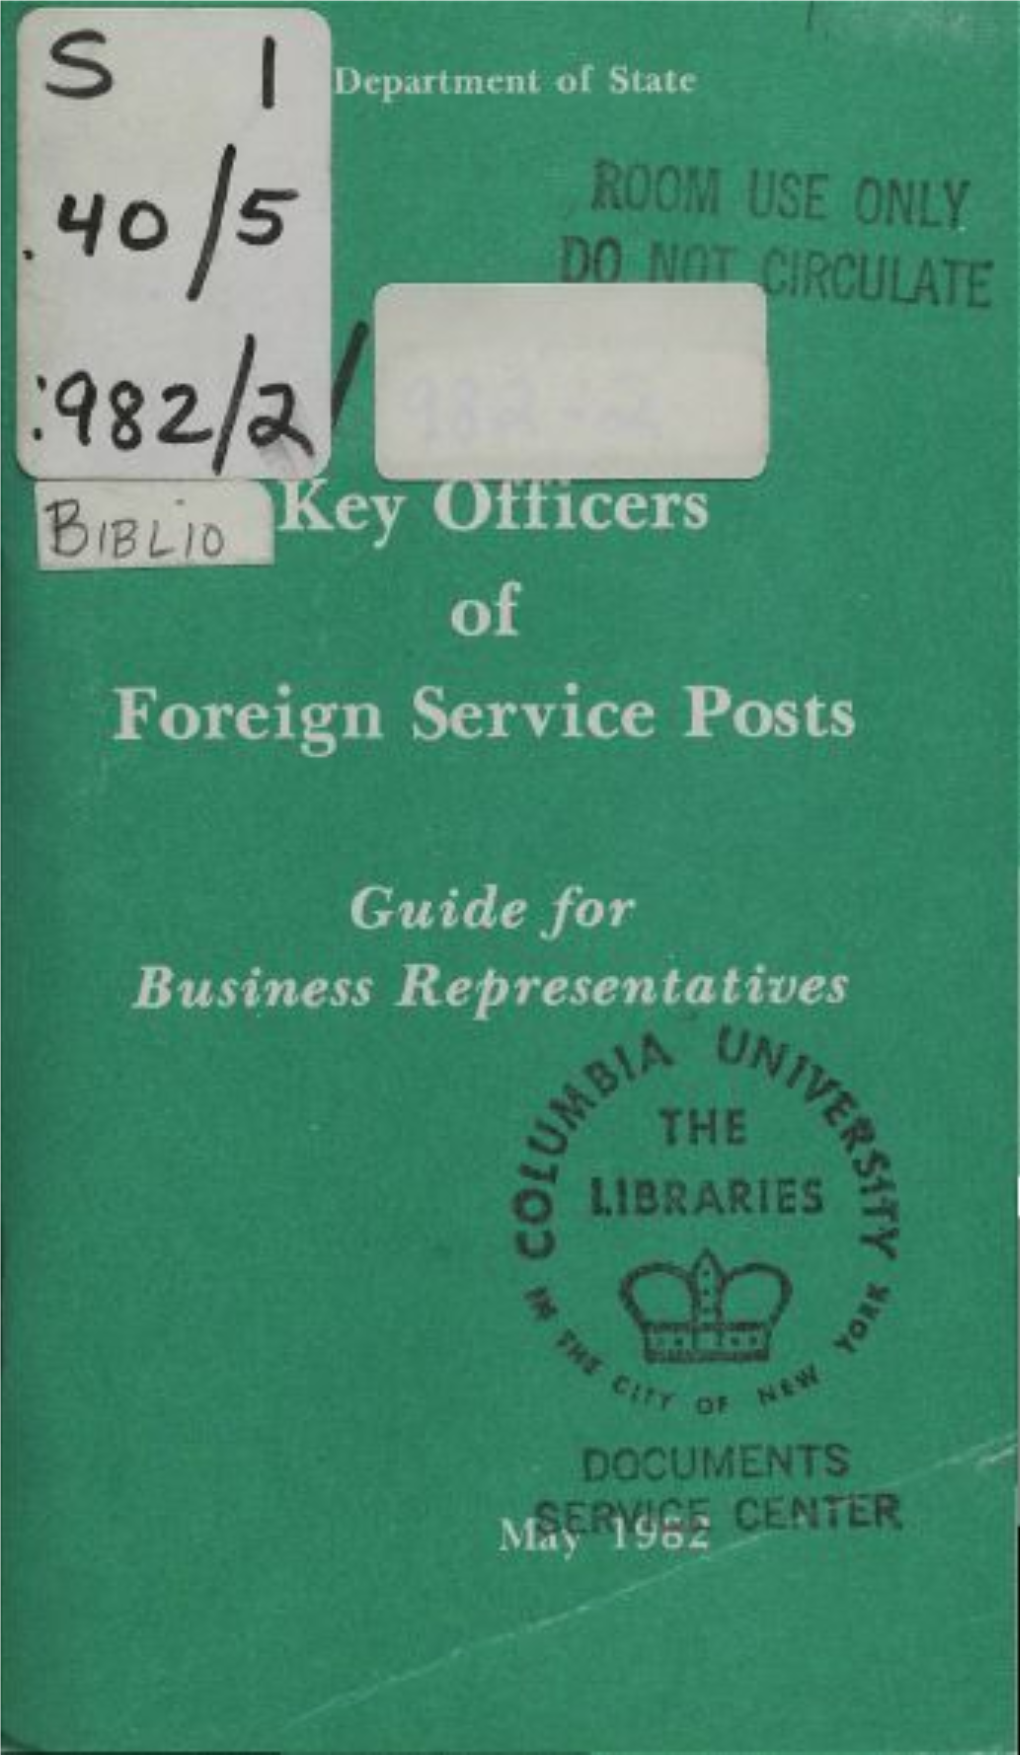 Department of State It Is Most Important That Correspondence to a Foreign Service Post Be Addressed to a Section Or Position Rather Than to an Officer by Name